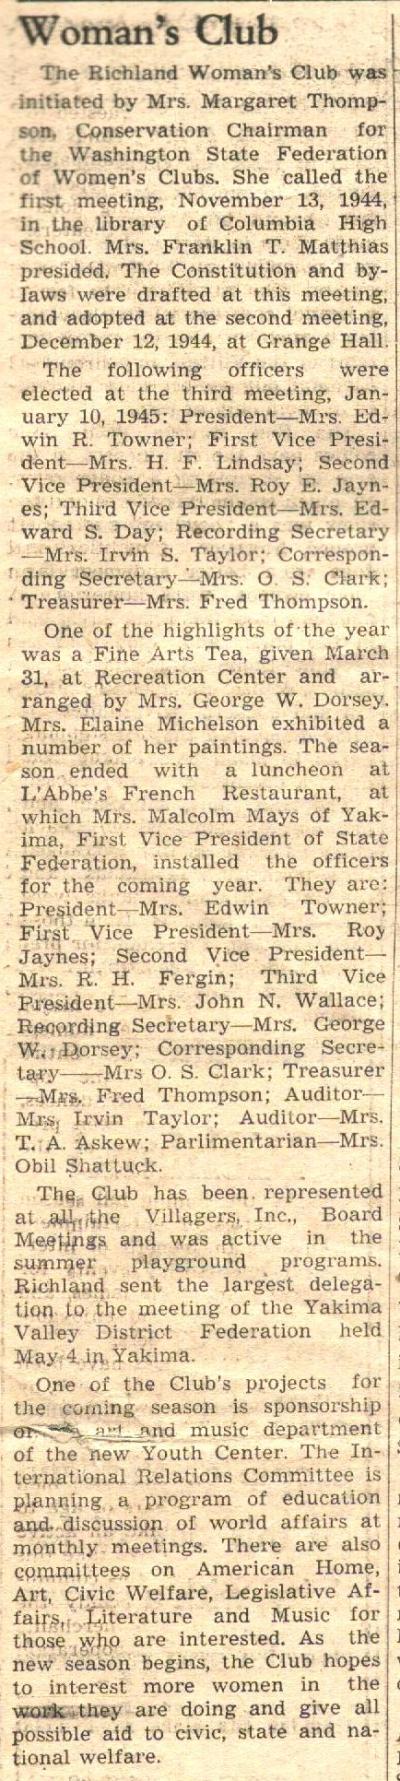 9/3/45 Villager - Page 6 ~ Women's Club